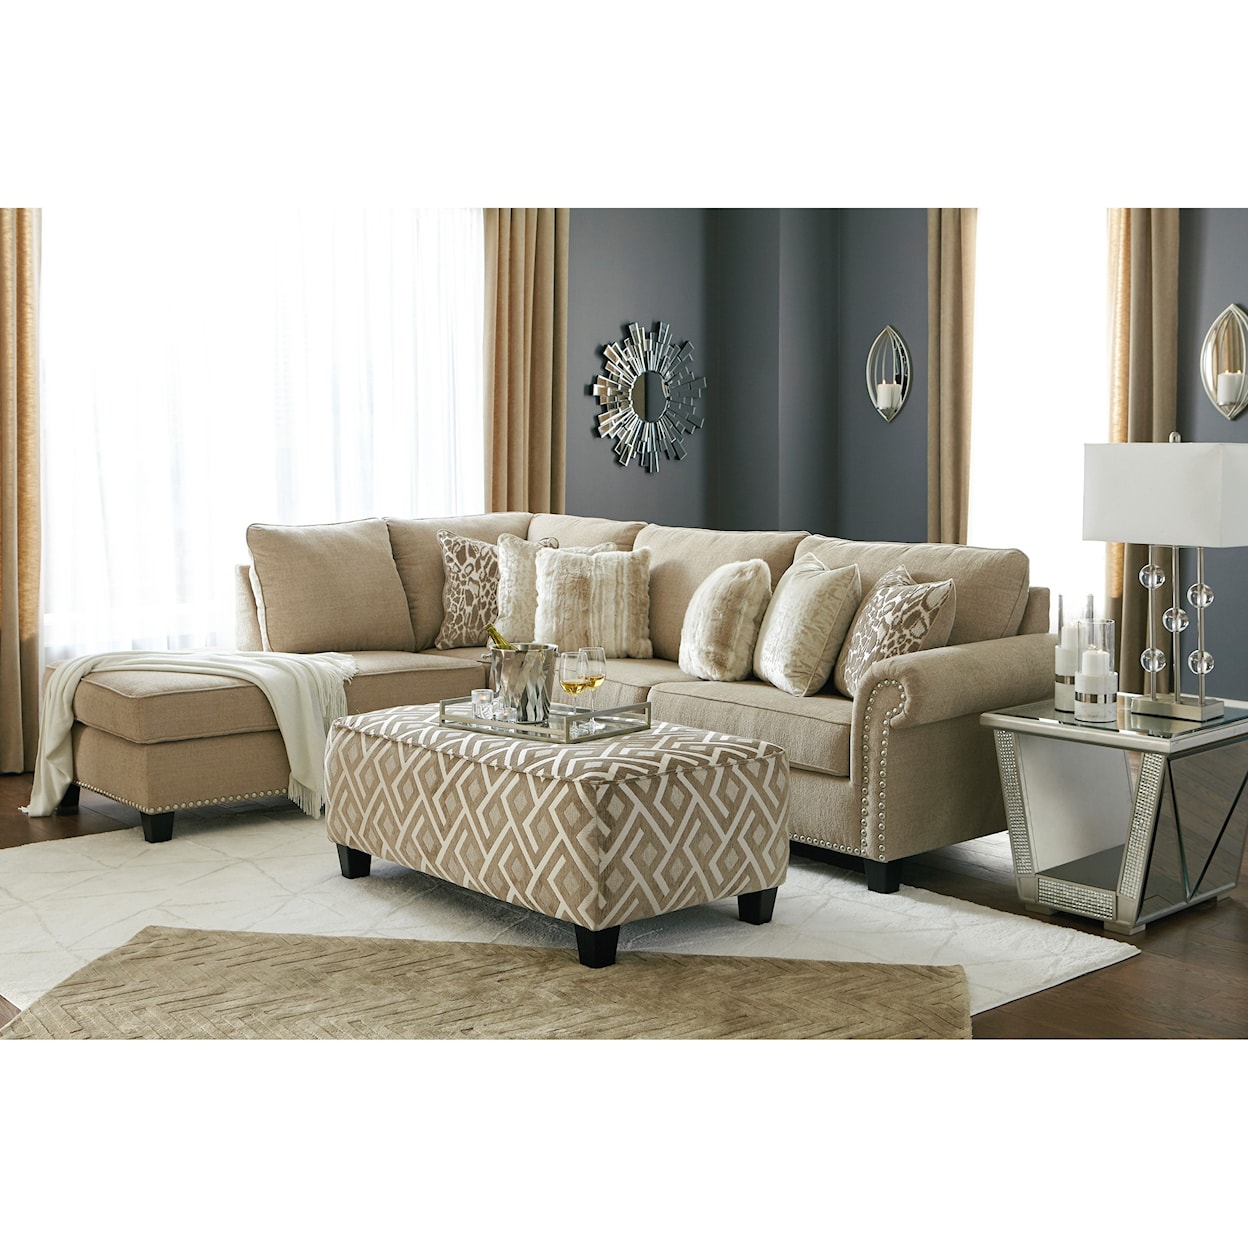 Signature Design by Ashley Dovemont Living Room Group